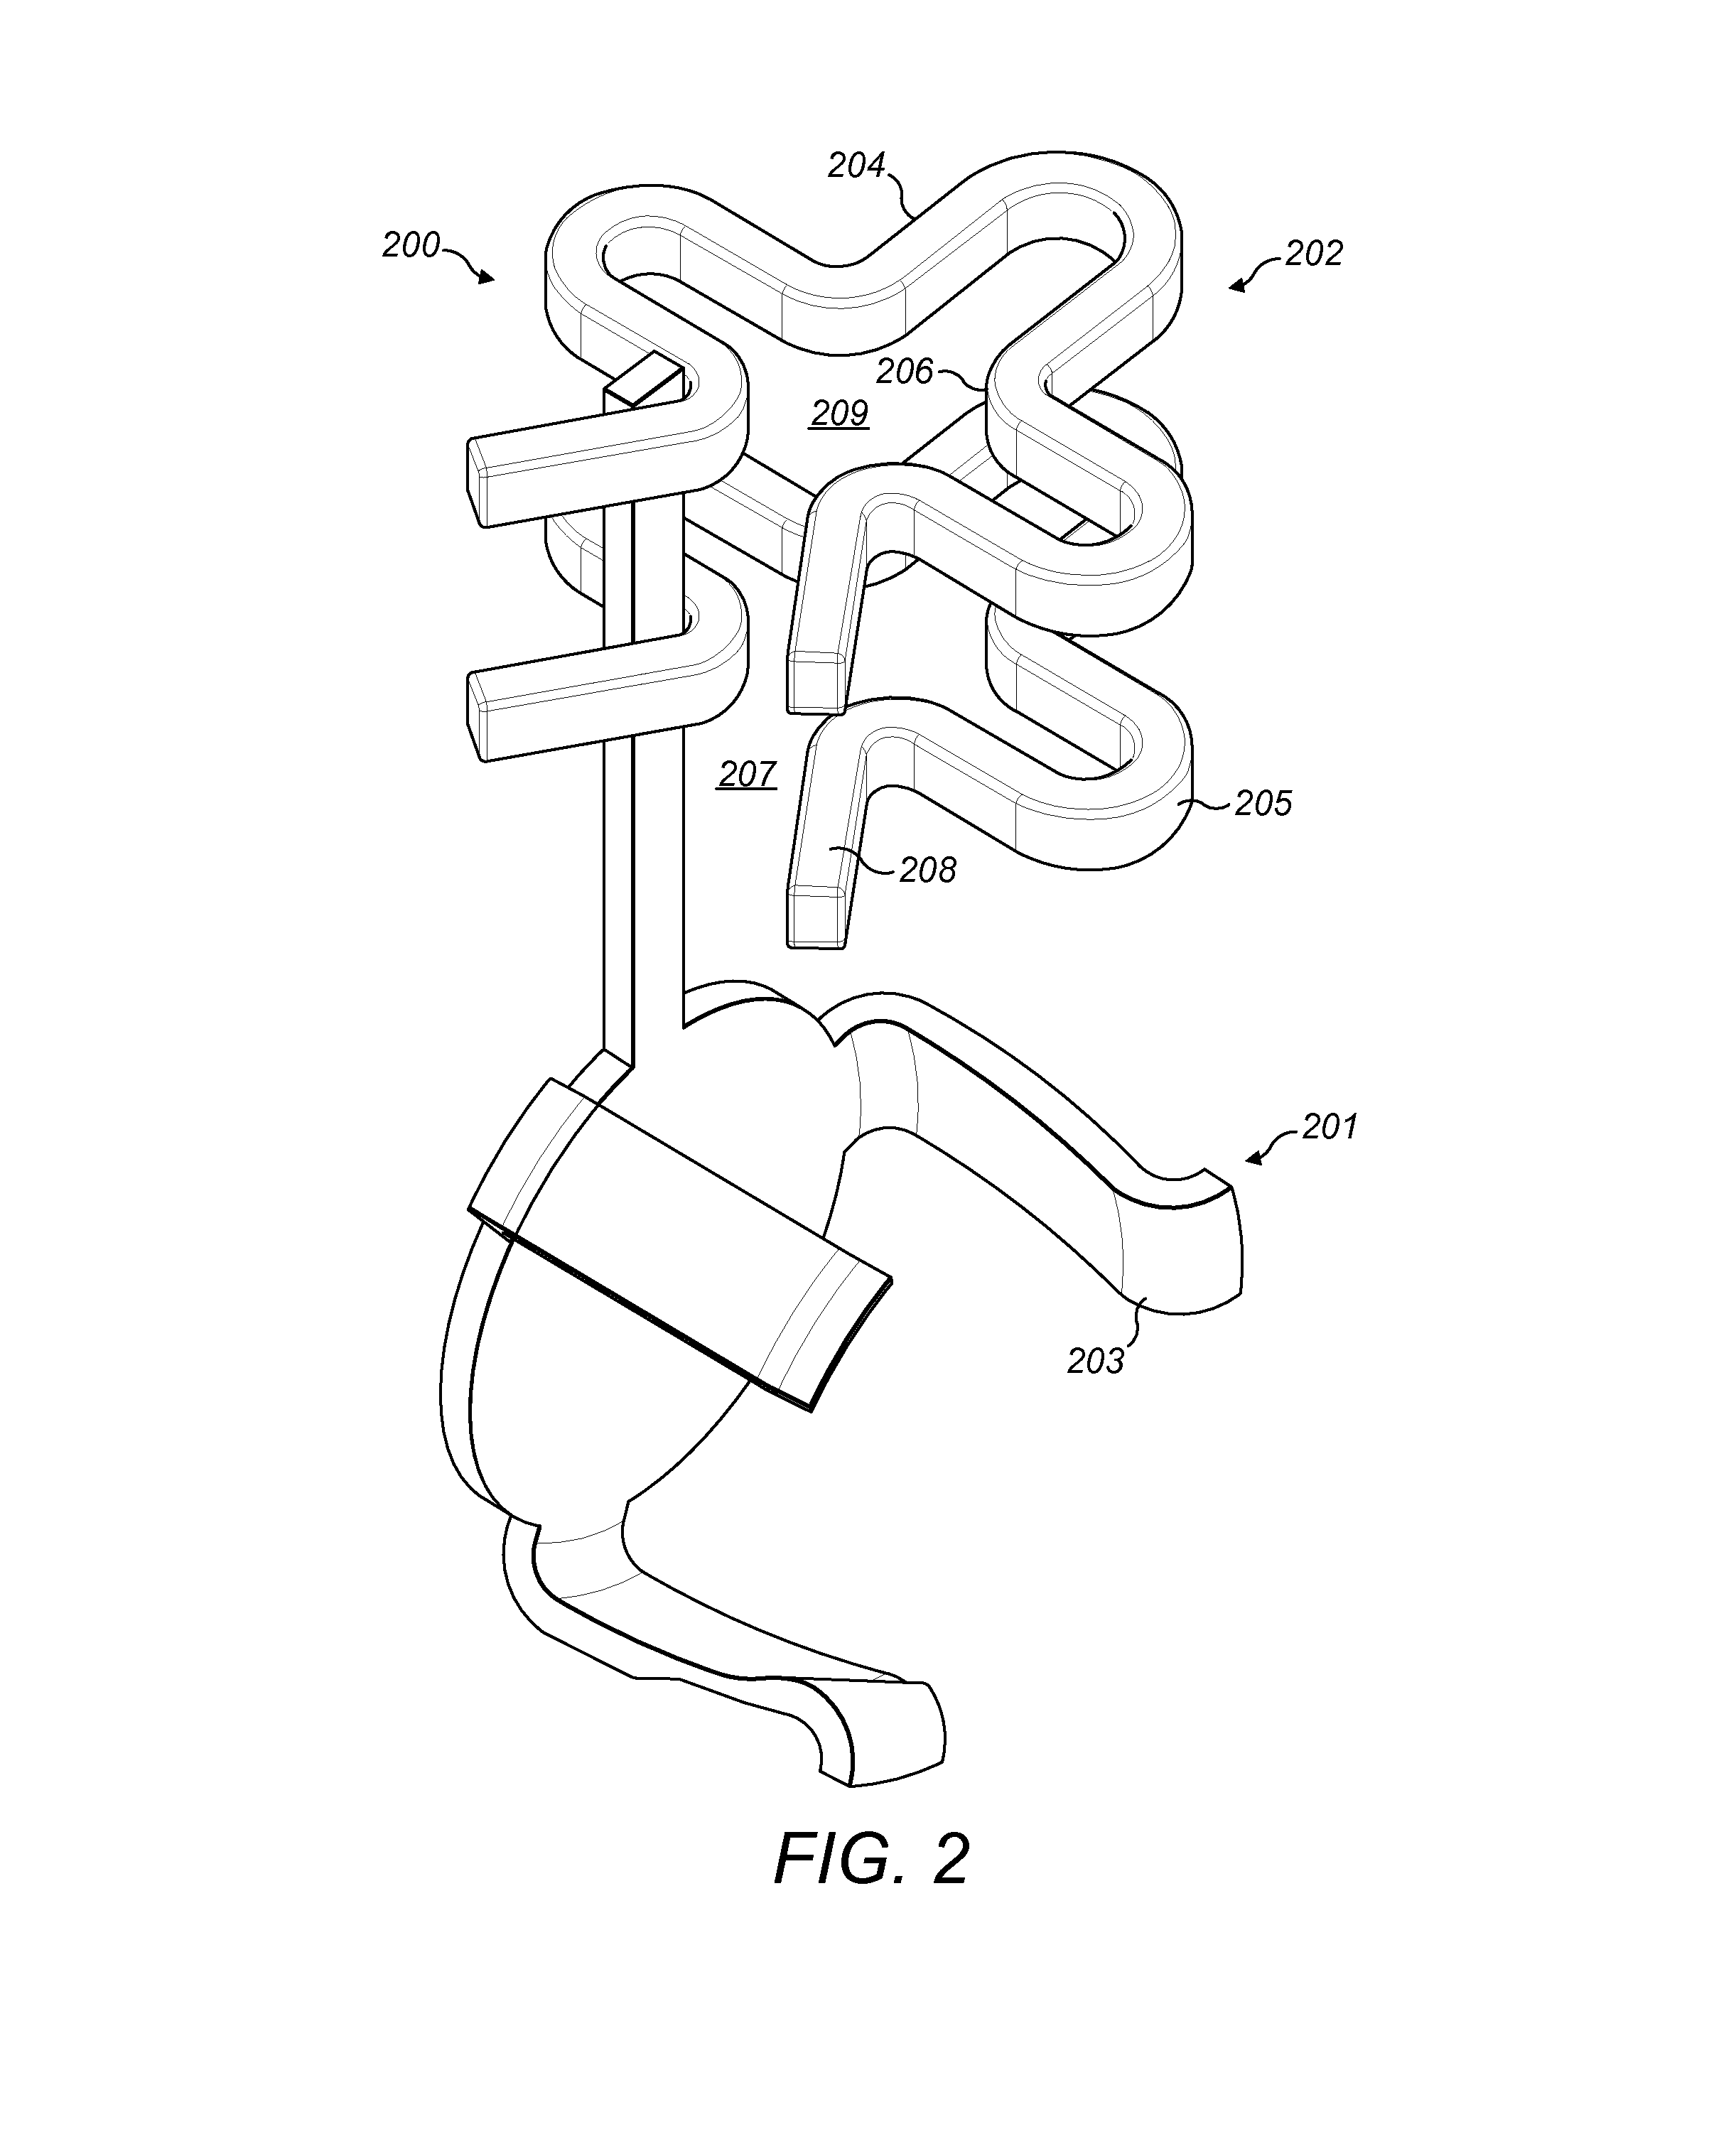 Clover Shape Attachment for Implantable Floating Mass Transducer